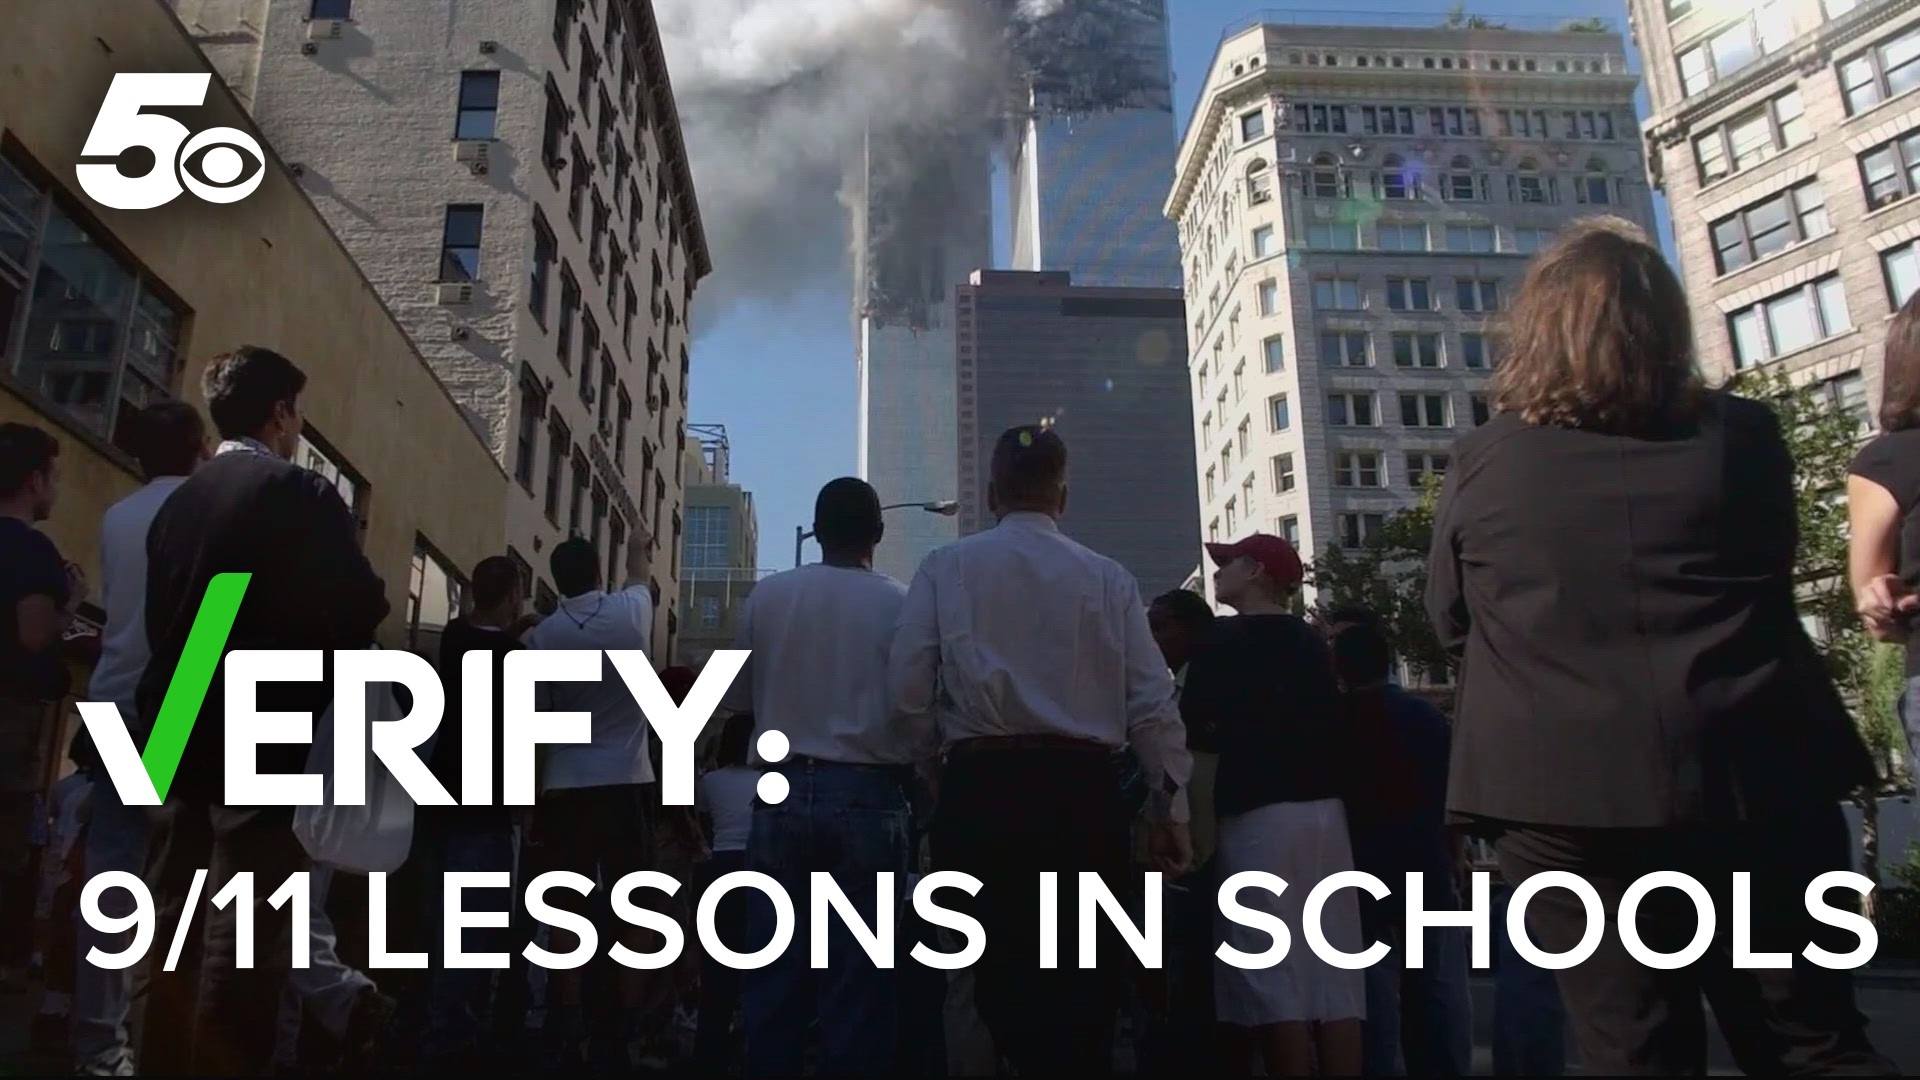 The 5NEWS VERIFY team looks into a viewer's claim that lessons on 9/11 are not taught in American history classes across the state.